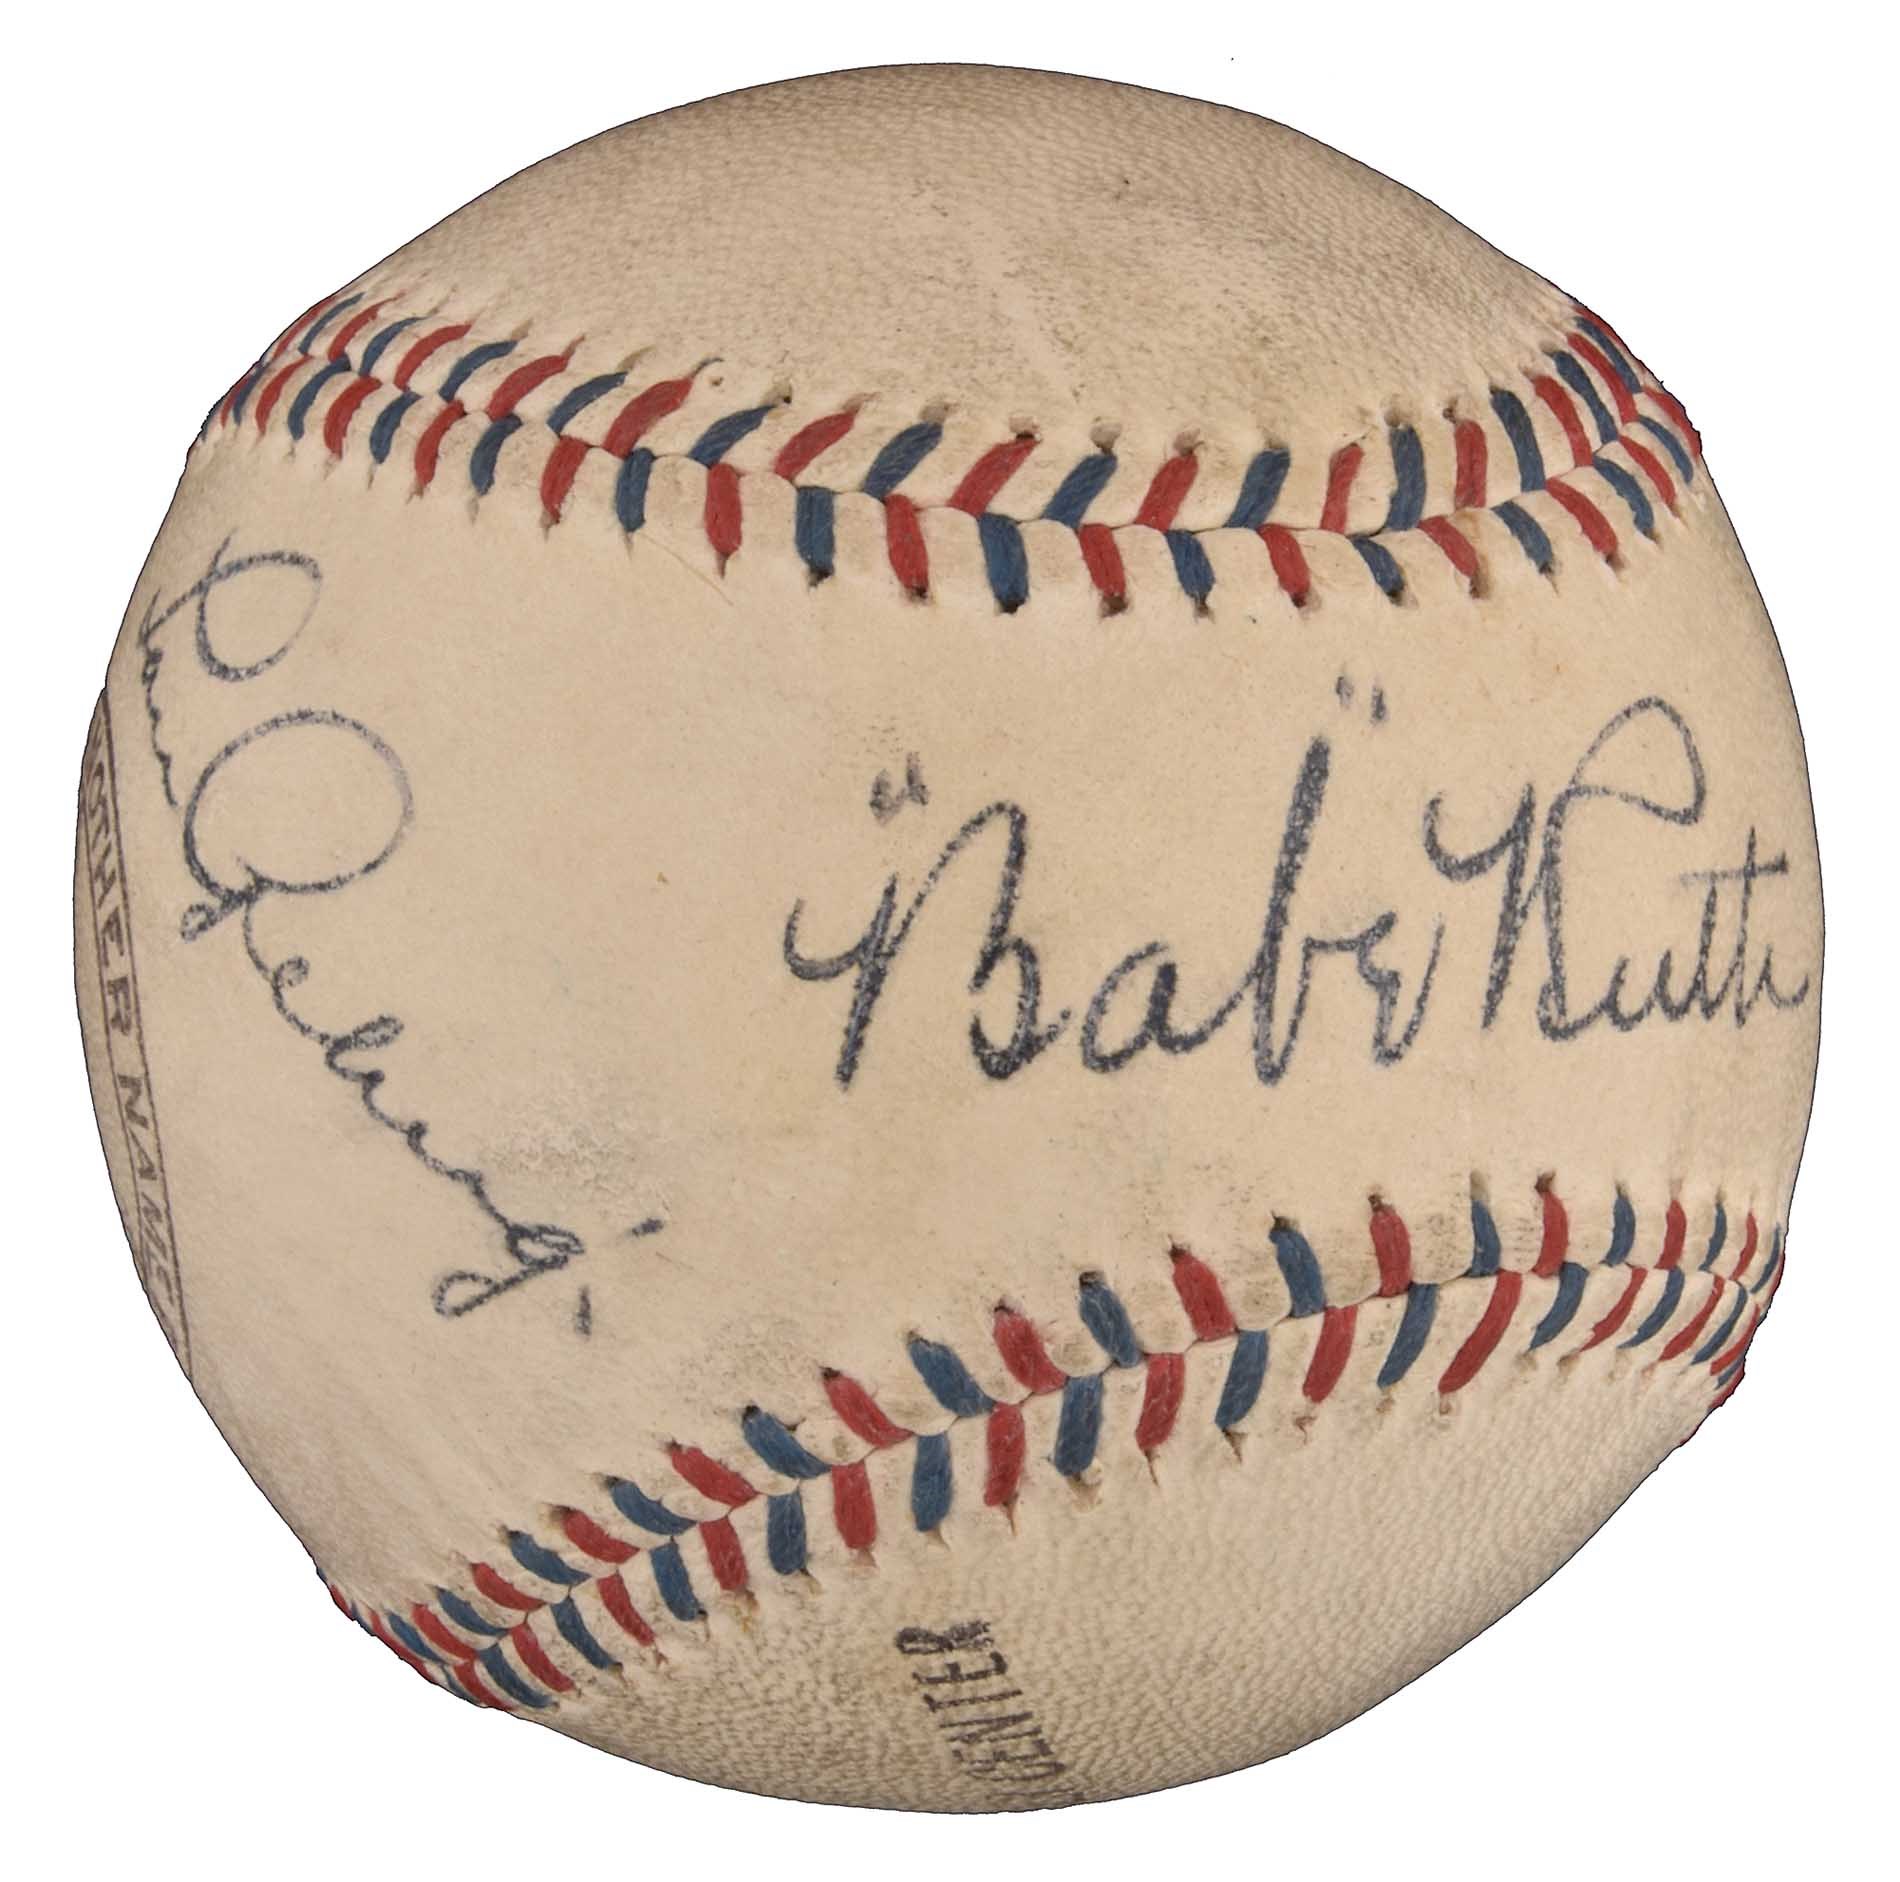 Sold at Auction: 1920S NEW YORK YANKEES LOU GEHRIG SIGNED BALL